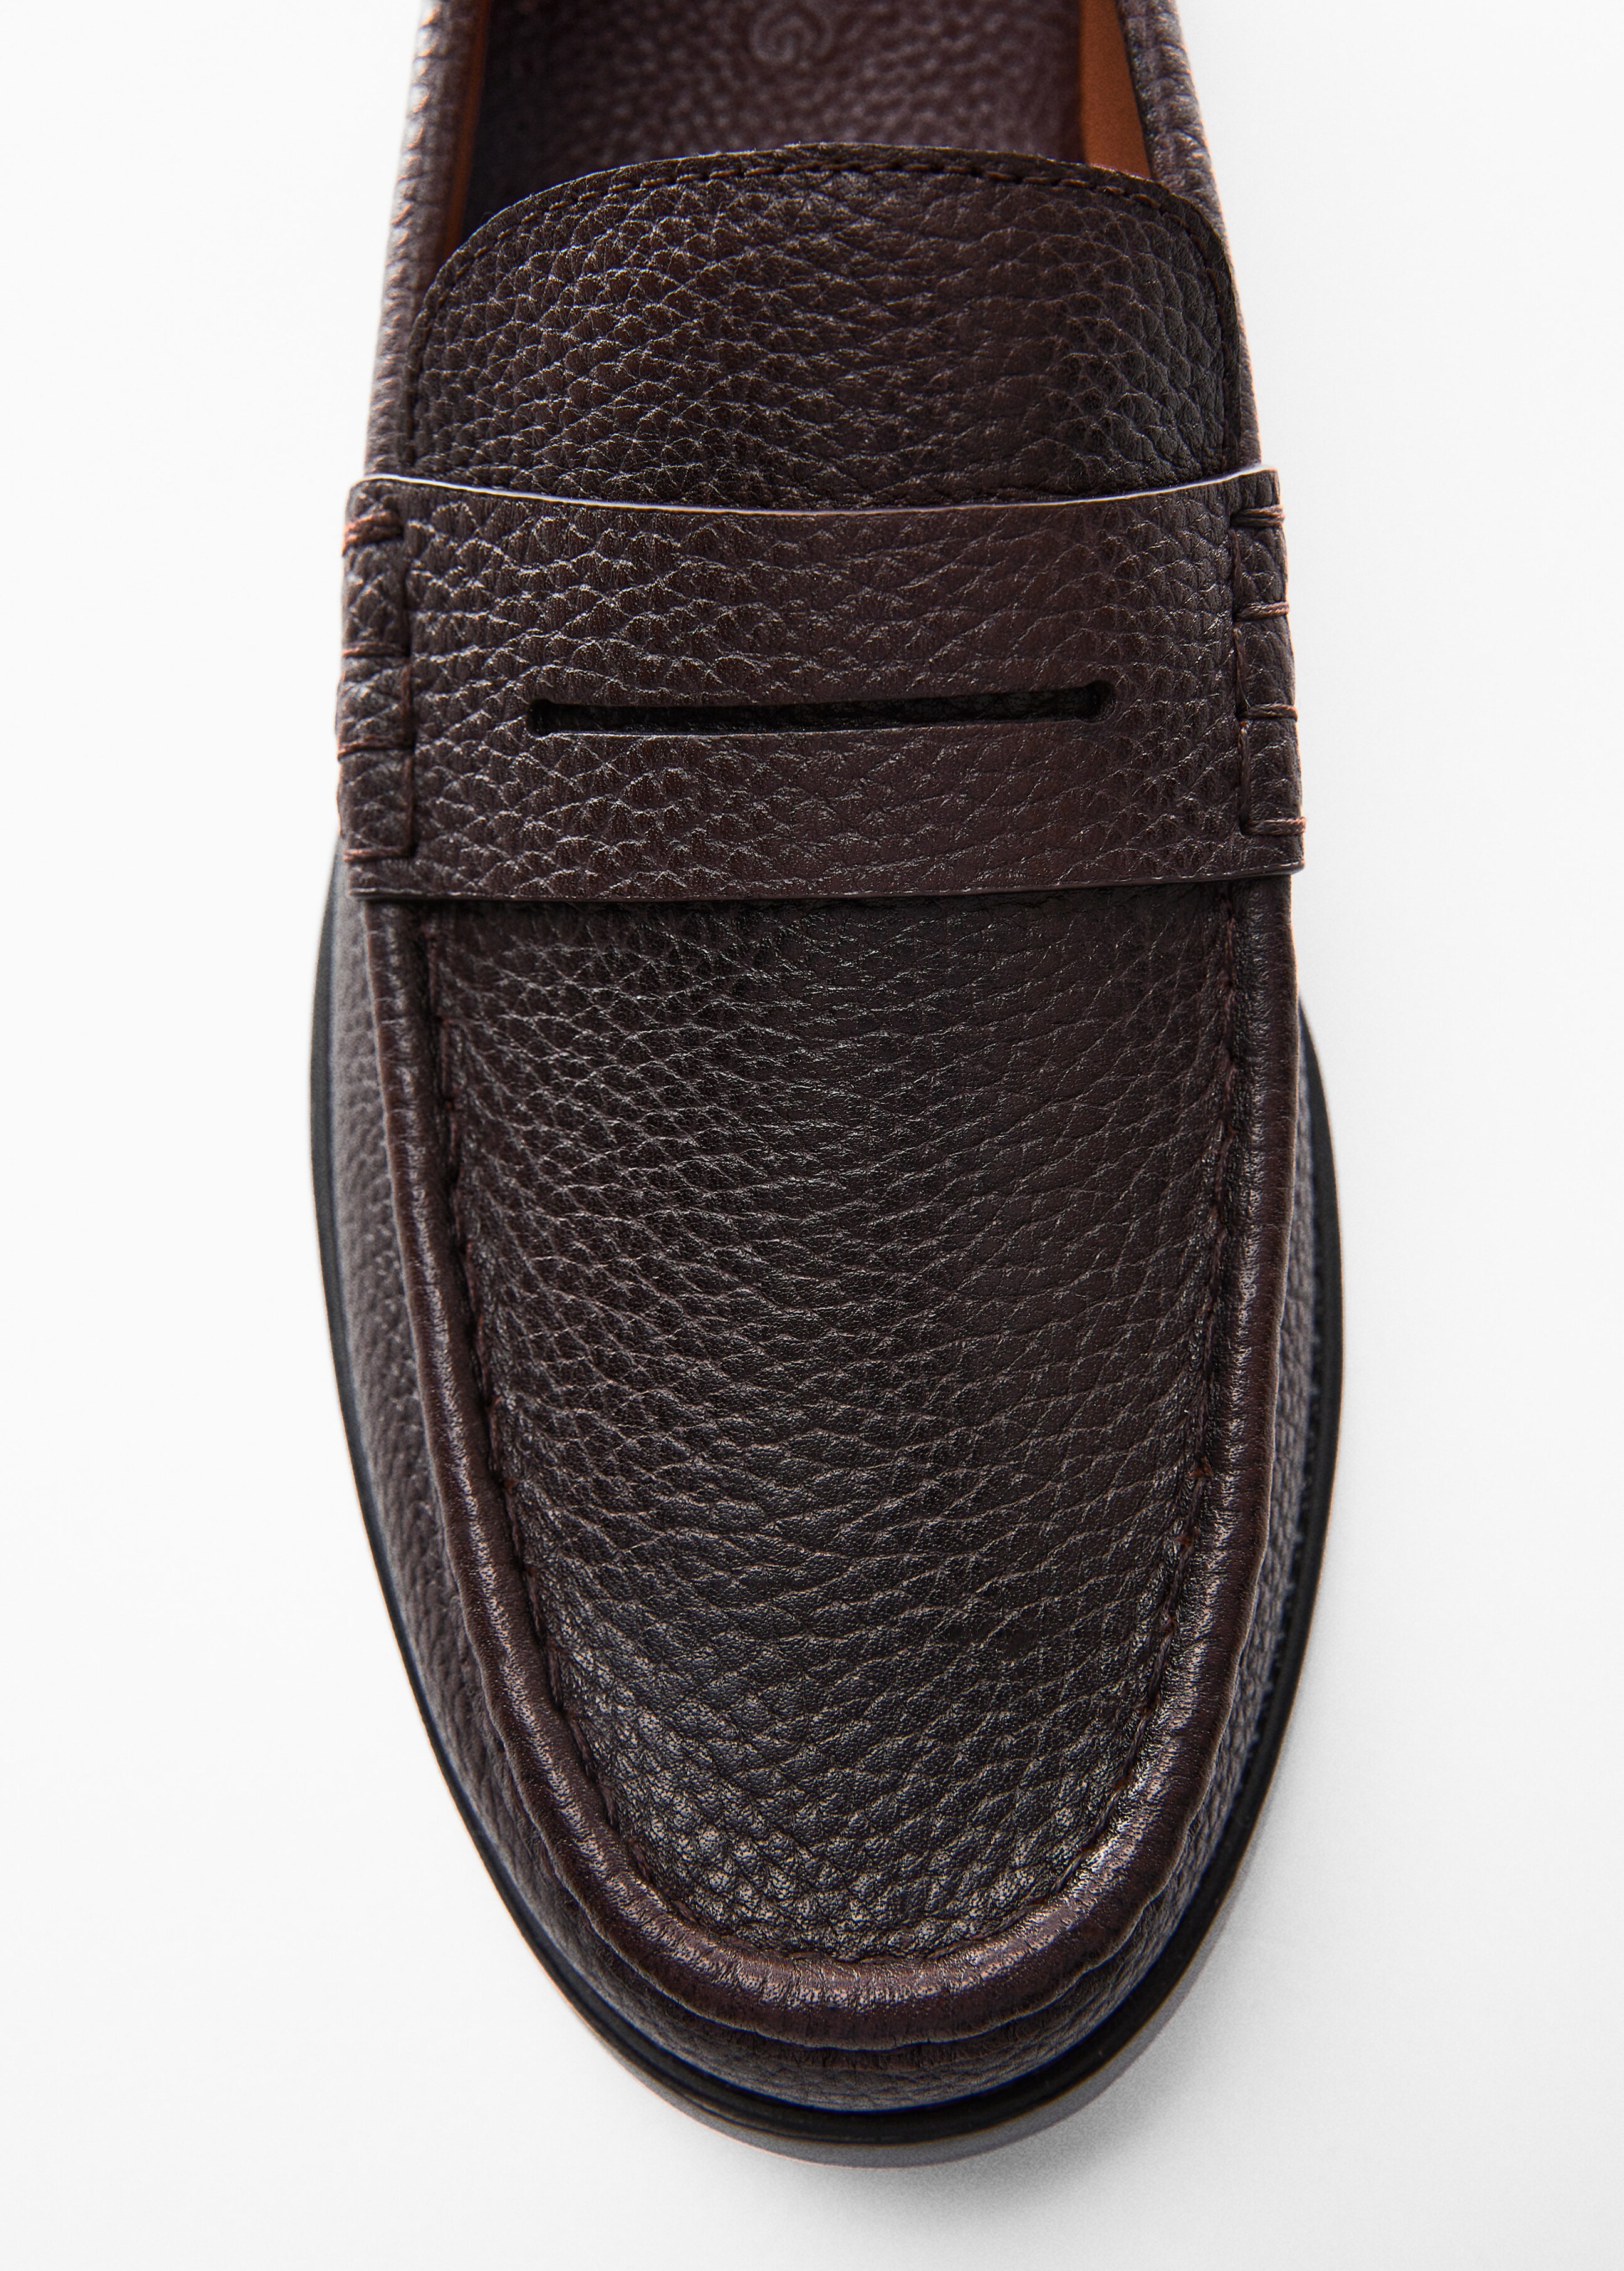 Moccasins with leather mask - Details of the article 5